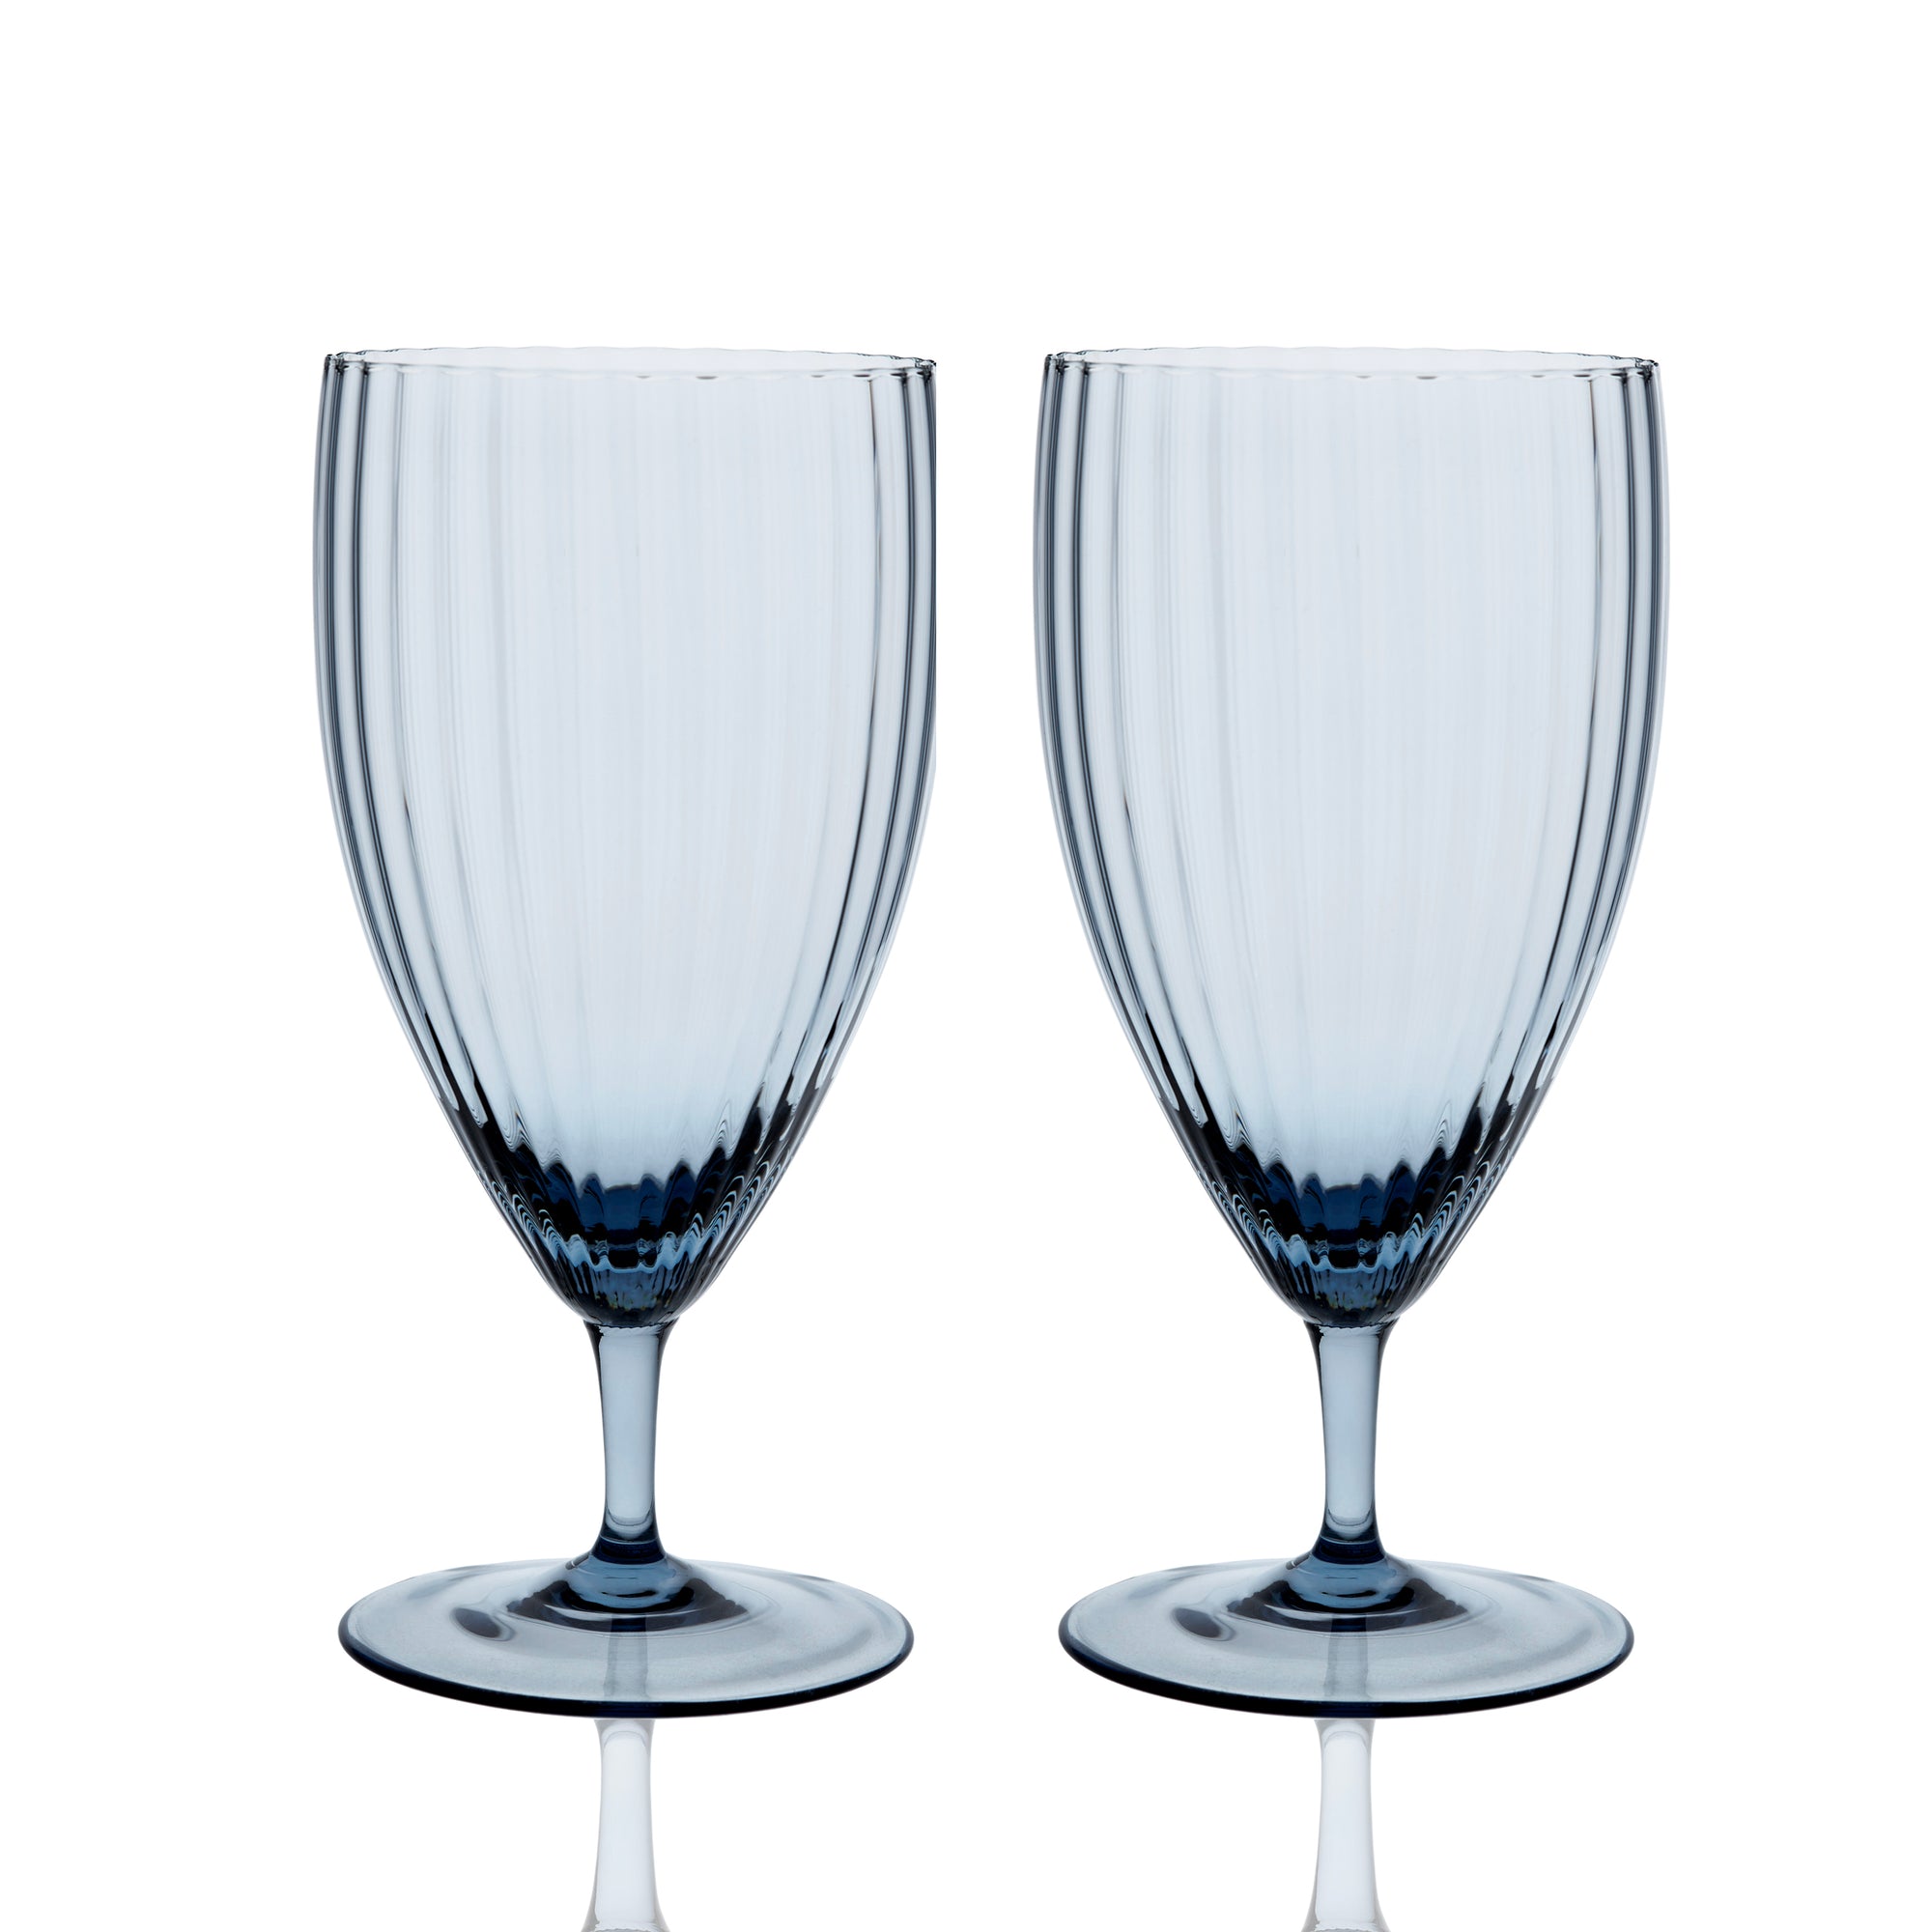 Quinn Optic Ocean Blue Everyday Stemmed Water Glasses Set of 2 Mouth Blown Crystal from Caskata